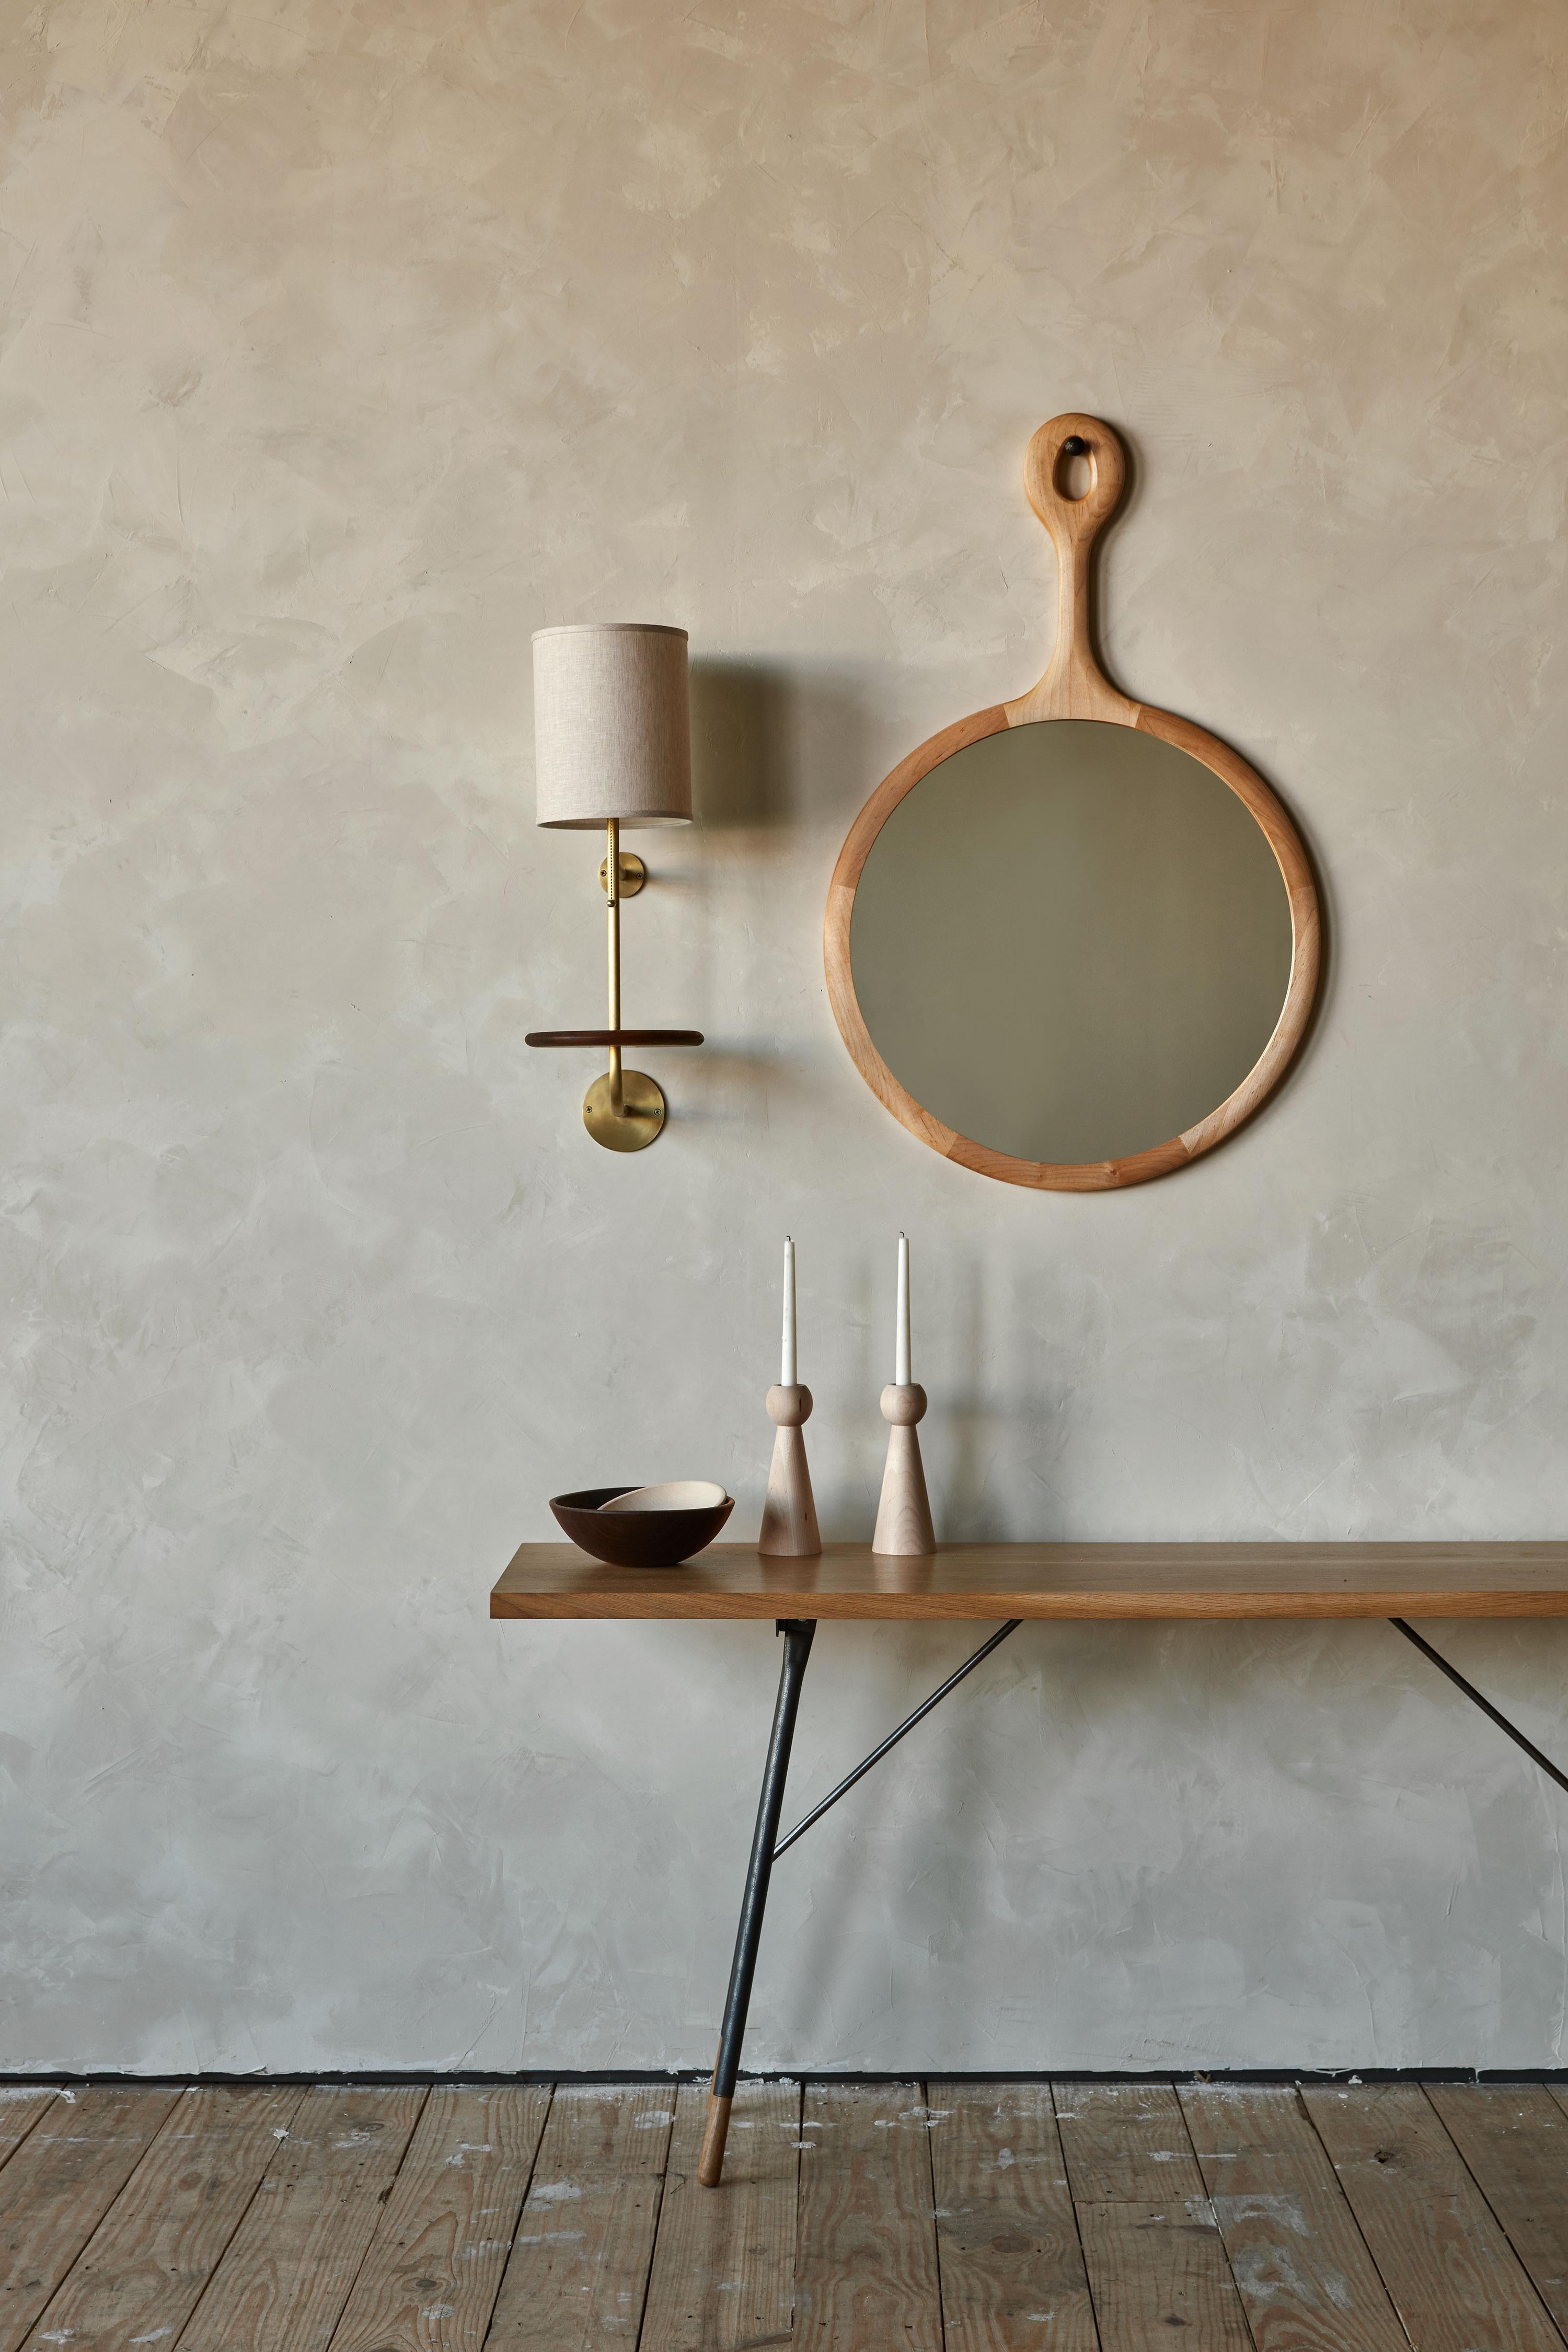 The Sophia mirror is framed in wooden maple with a long neck resembling an oversized hand mirror. Handcrafted in Pennsylvania, the Sophia comes with a hand-hammered iron peg for hanging. The medium is a lovely size above a dresser or in a hallway.